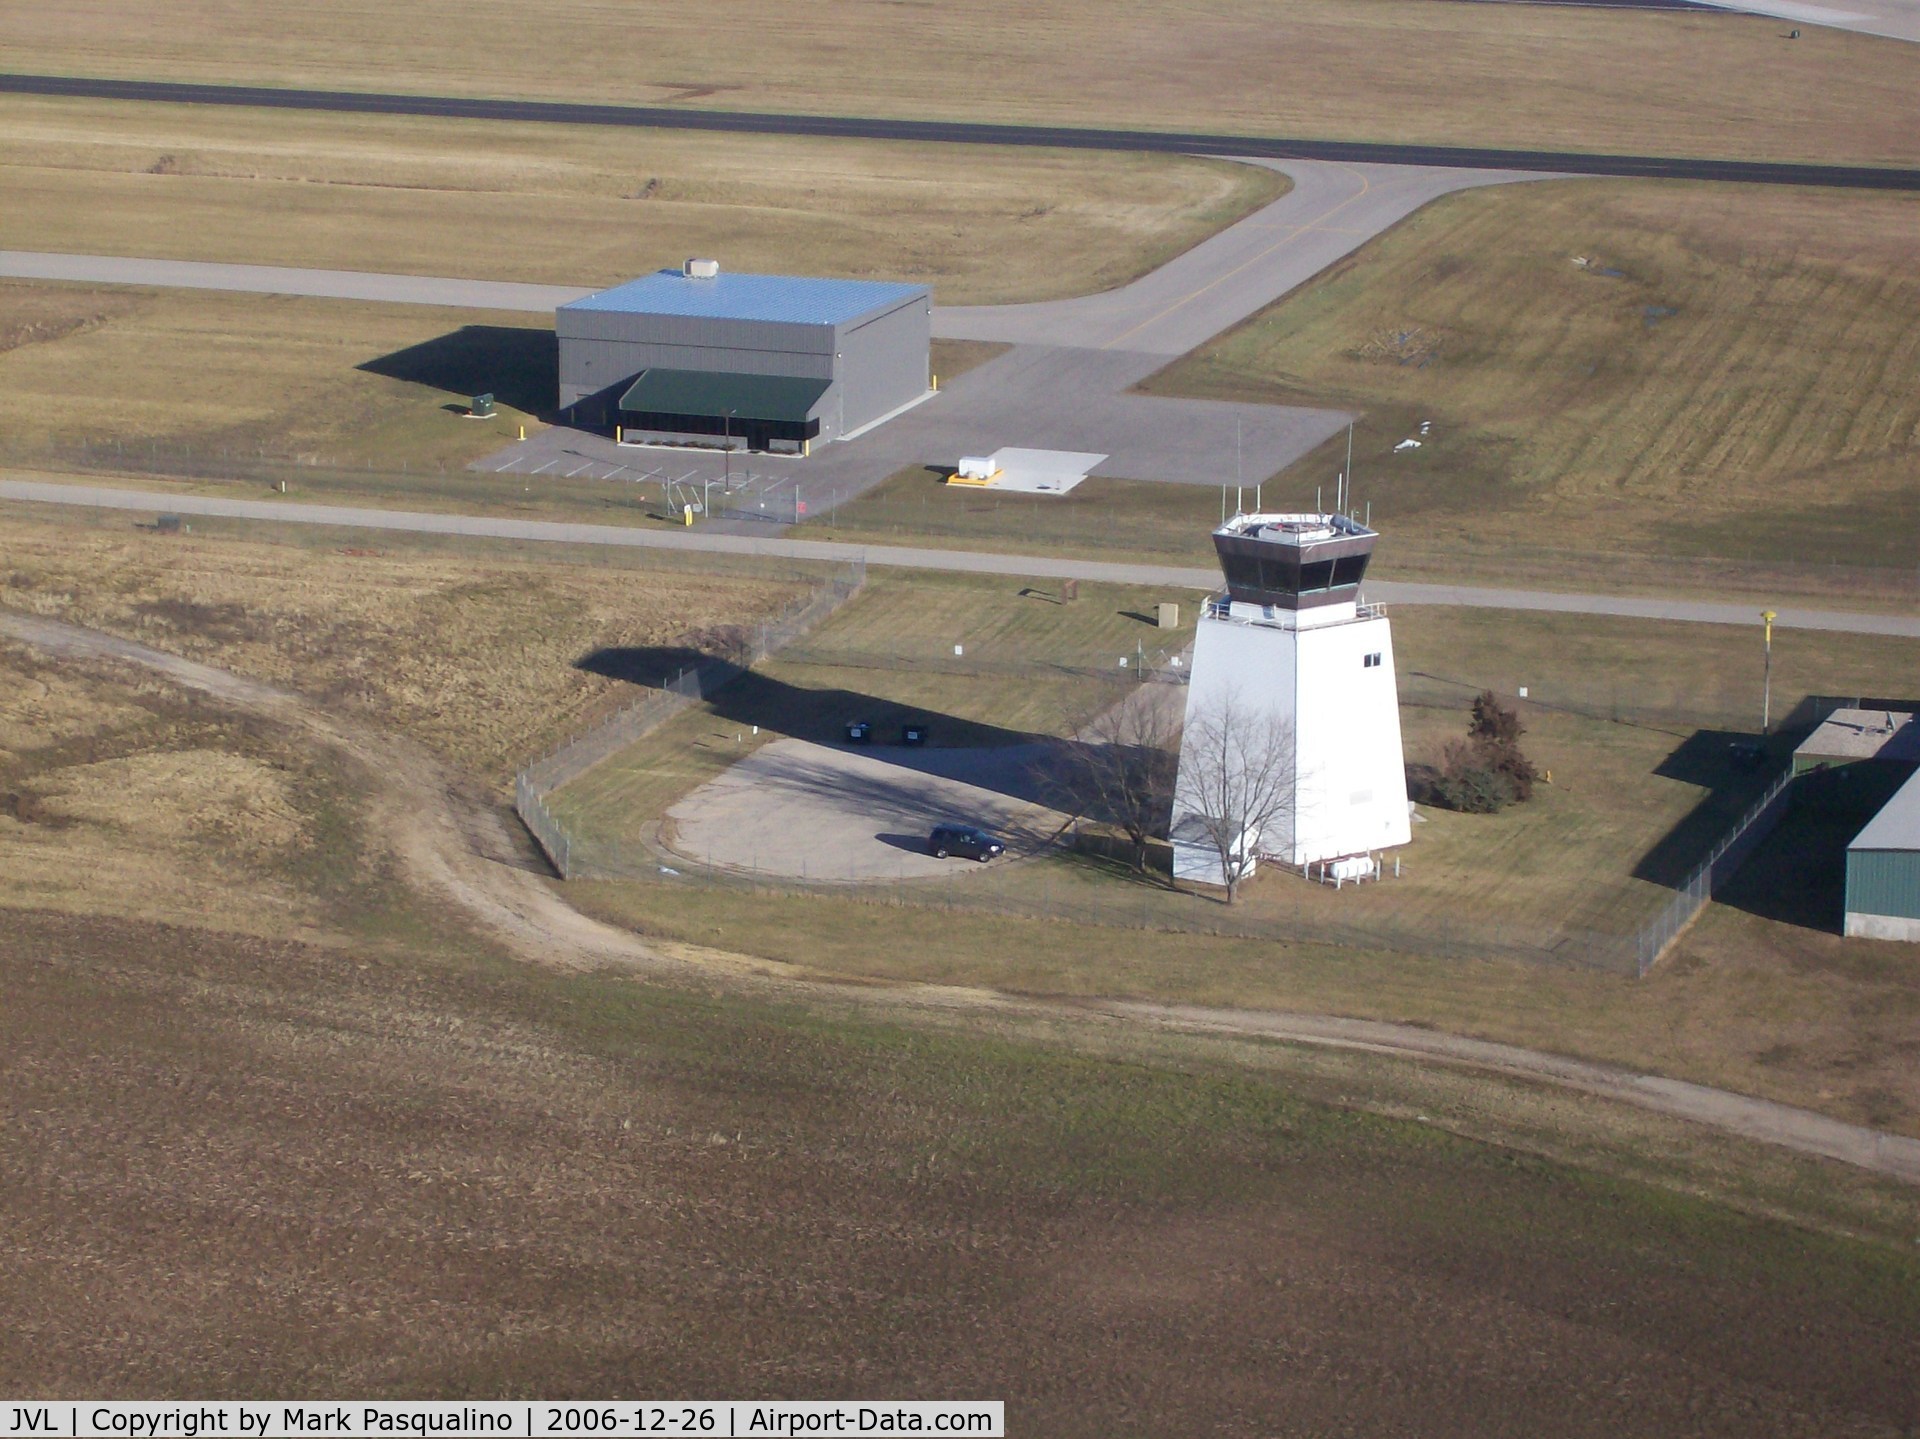 Southern Wisconsin Regional Airport (JVL) - Control Tower